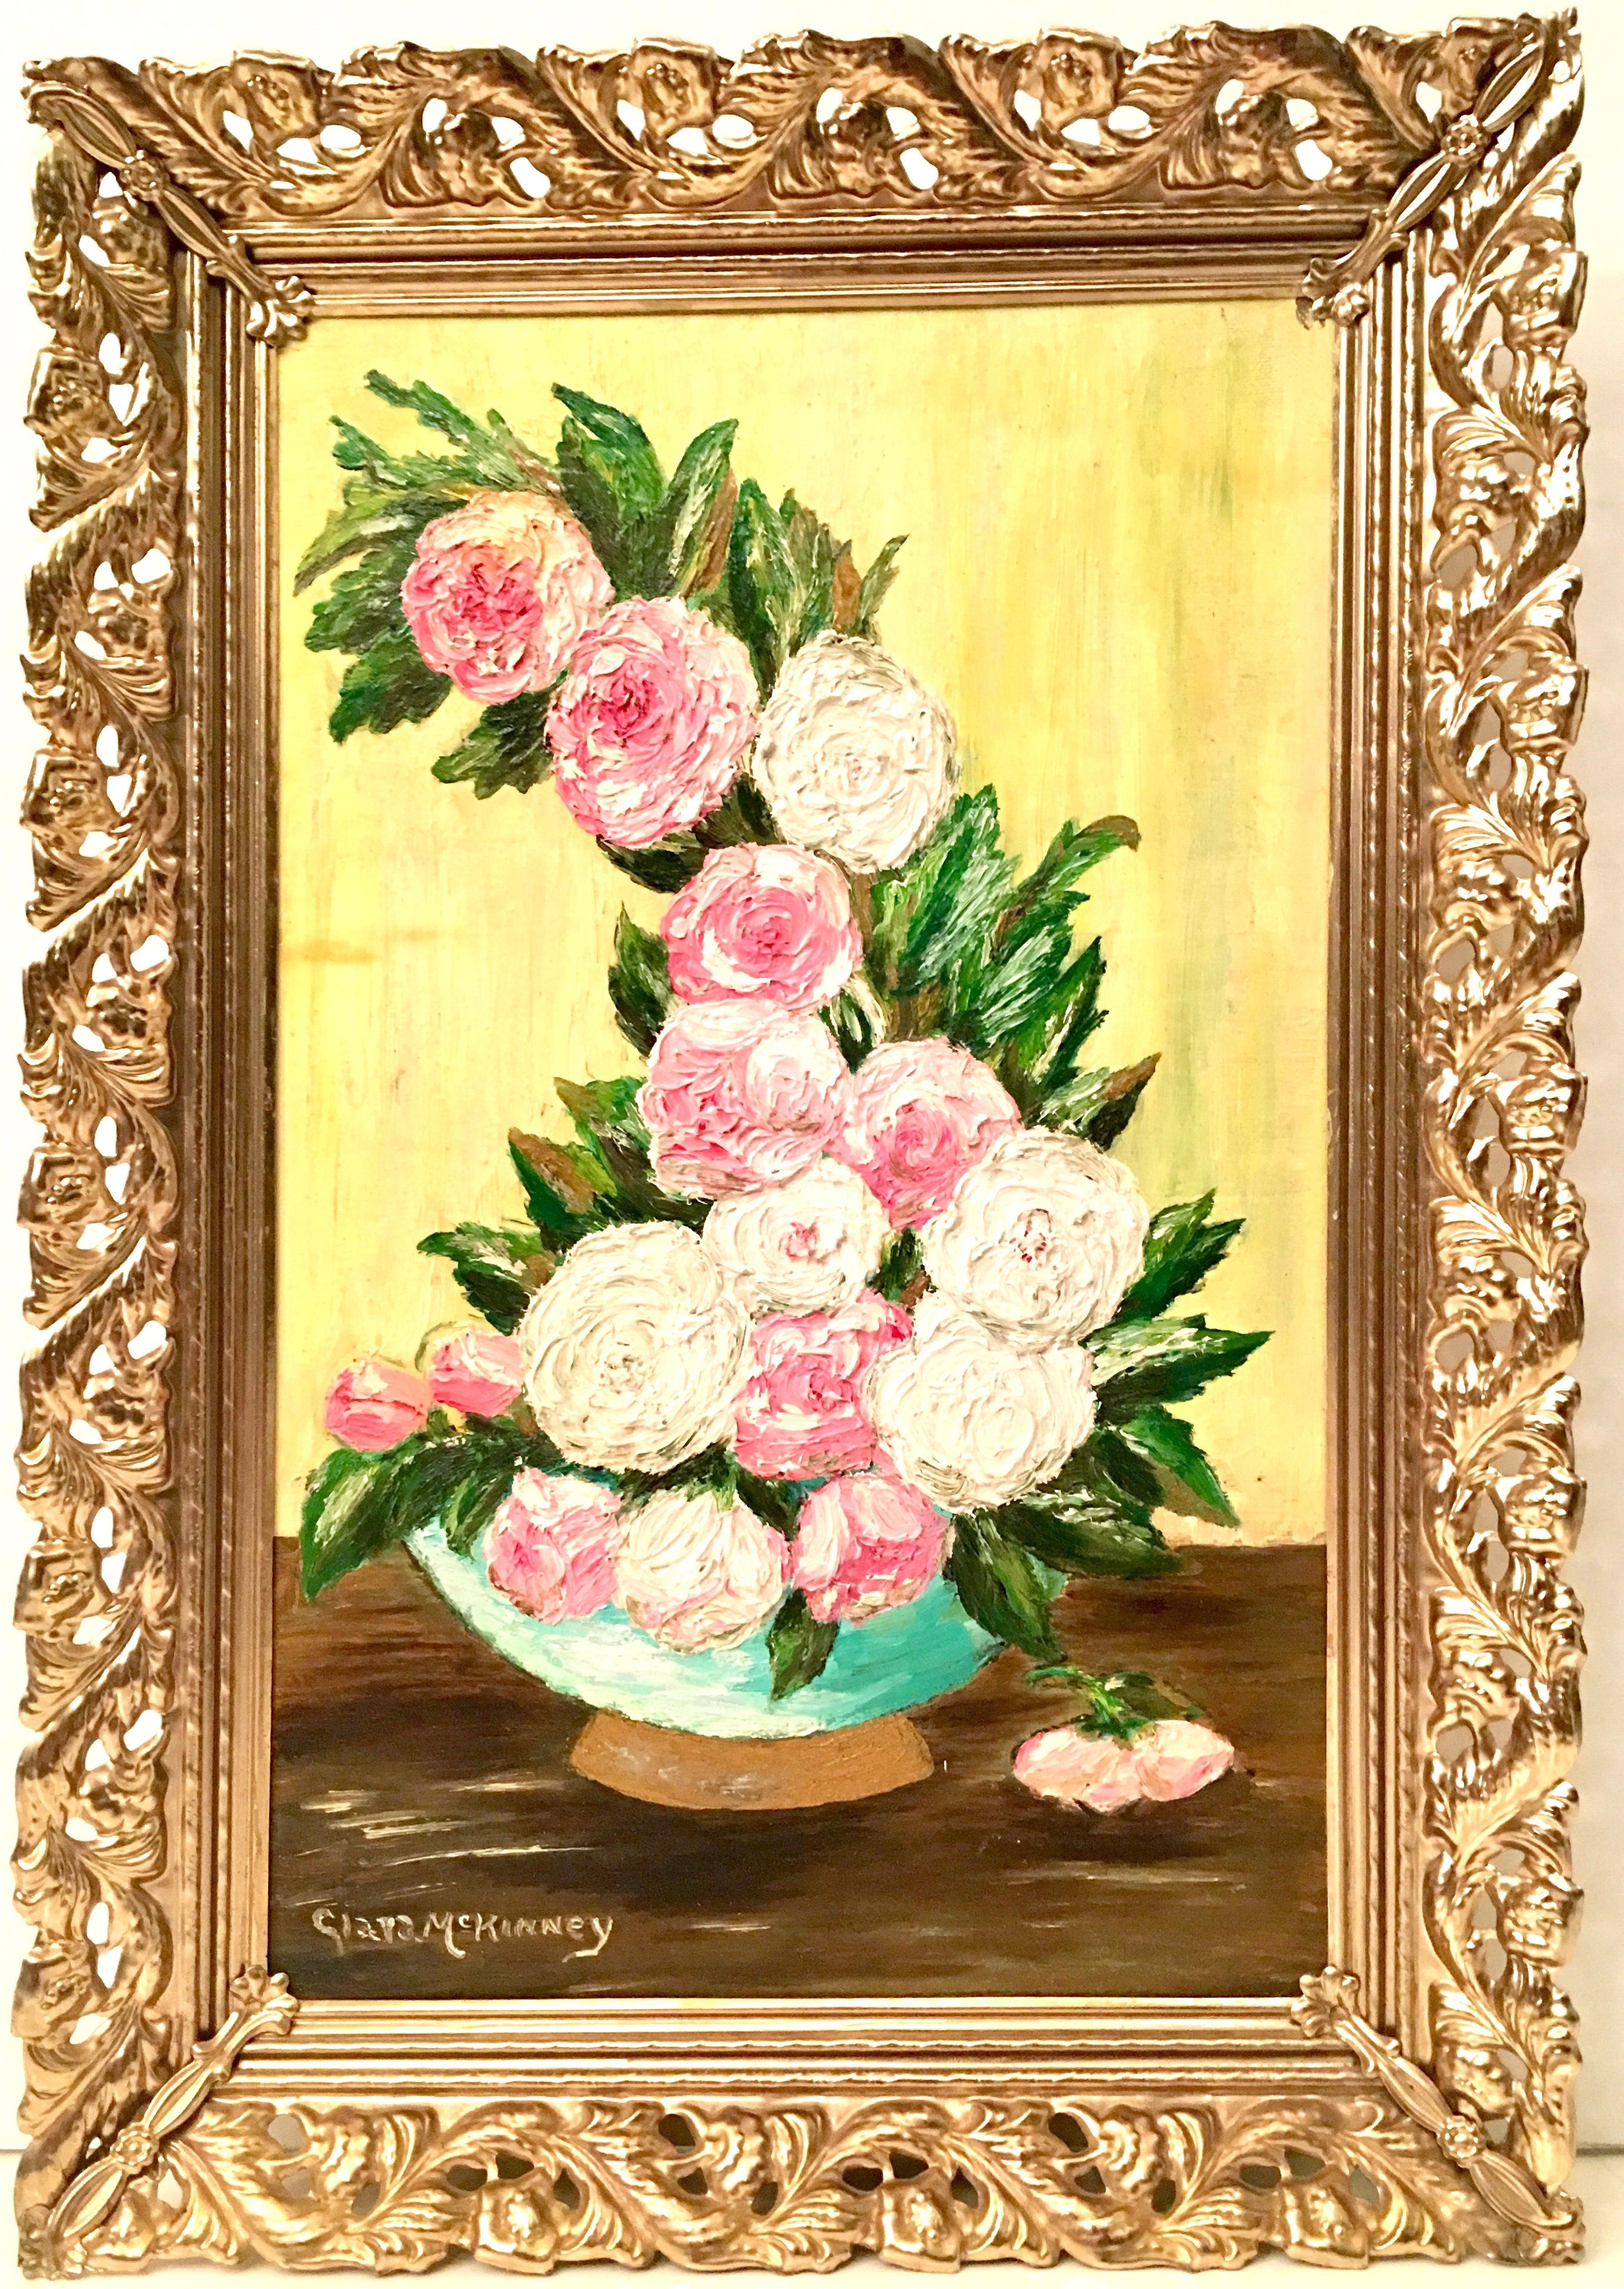 20th Century oil on canvas painting, still life flowers By, Clara McKinney. Signed front lower left. Framed in a gold metal frame.